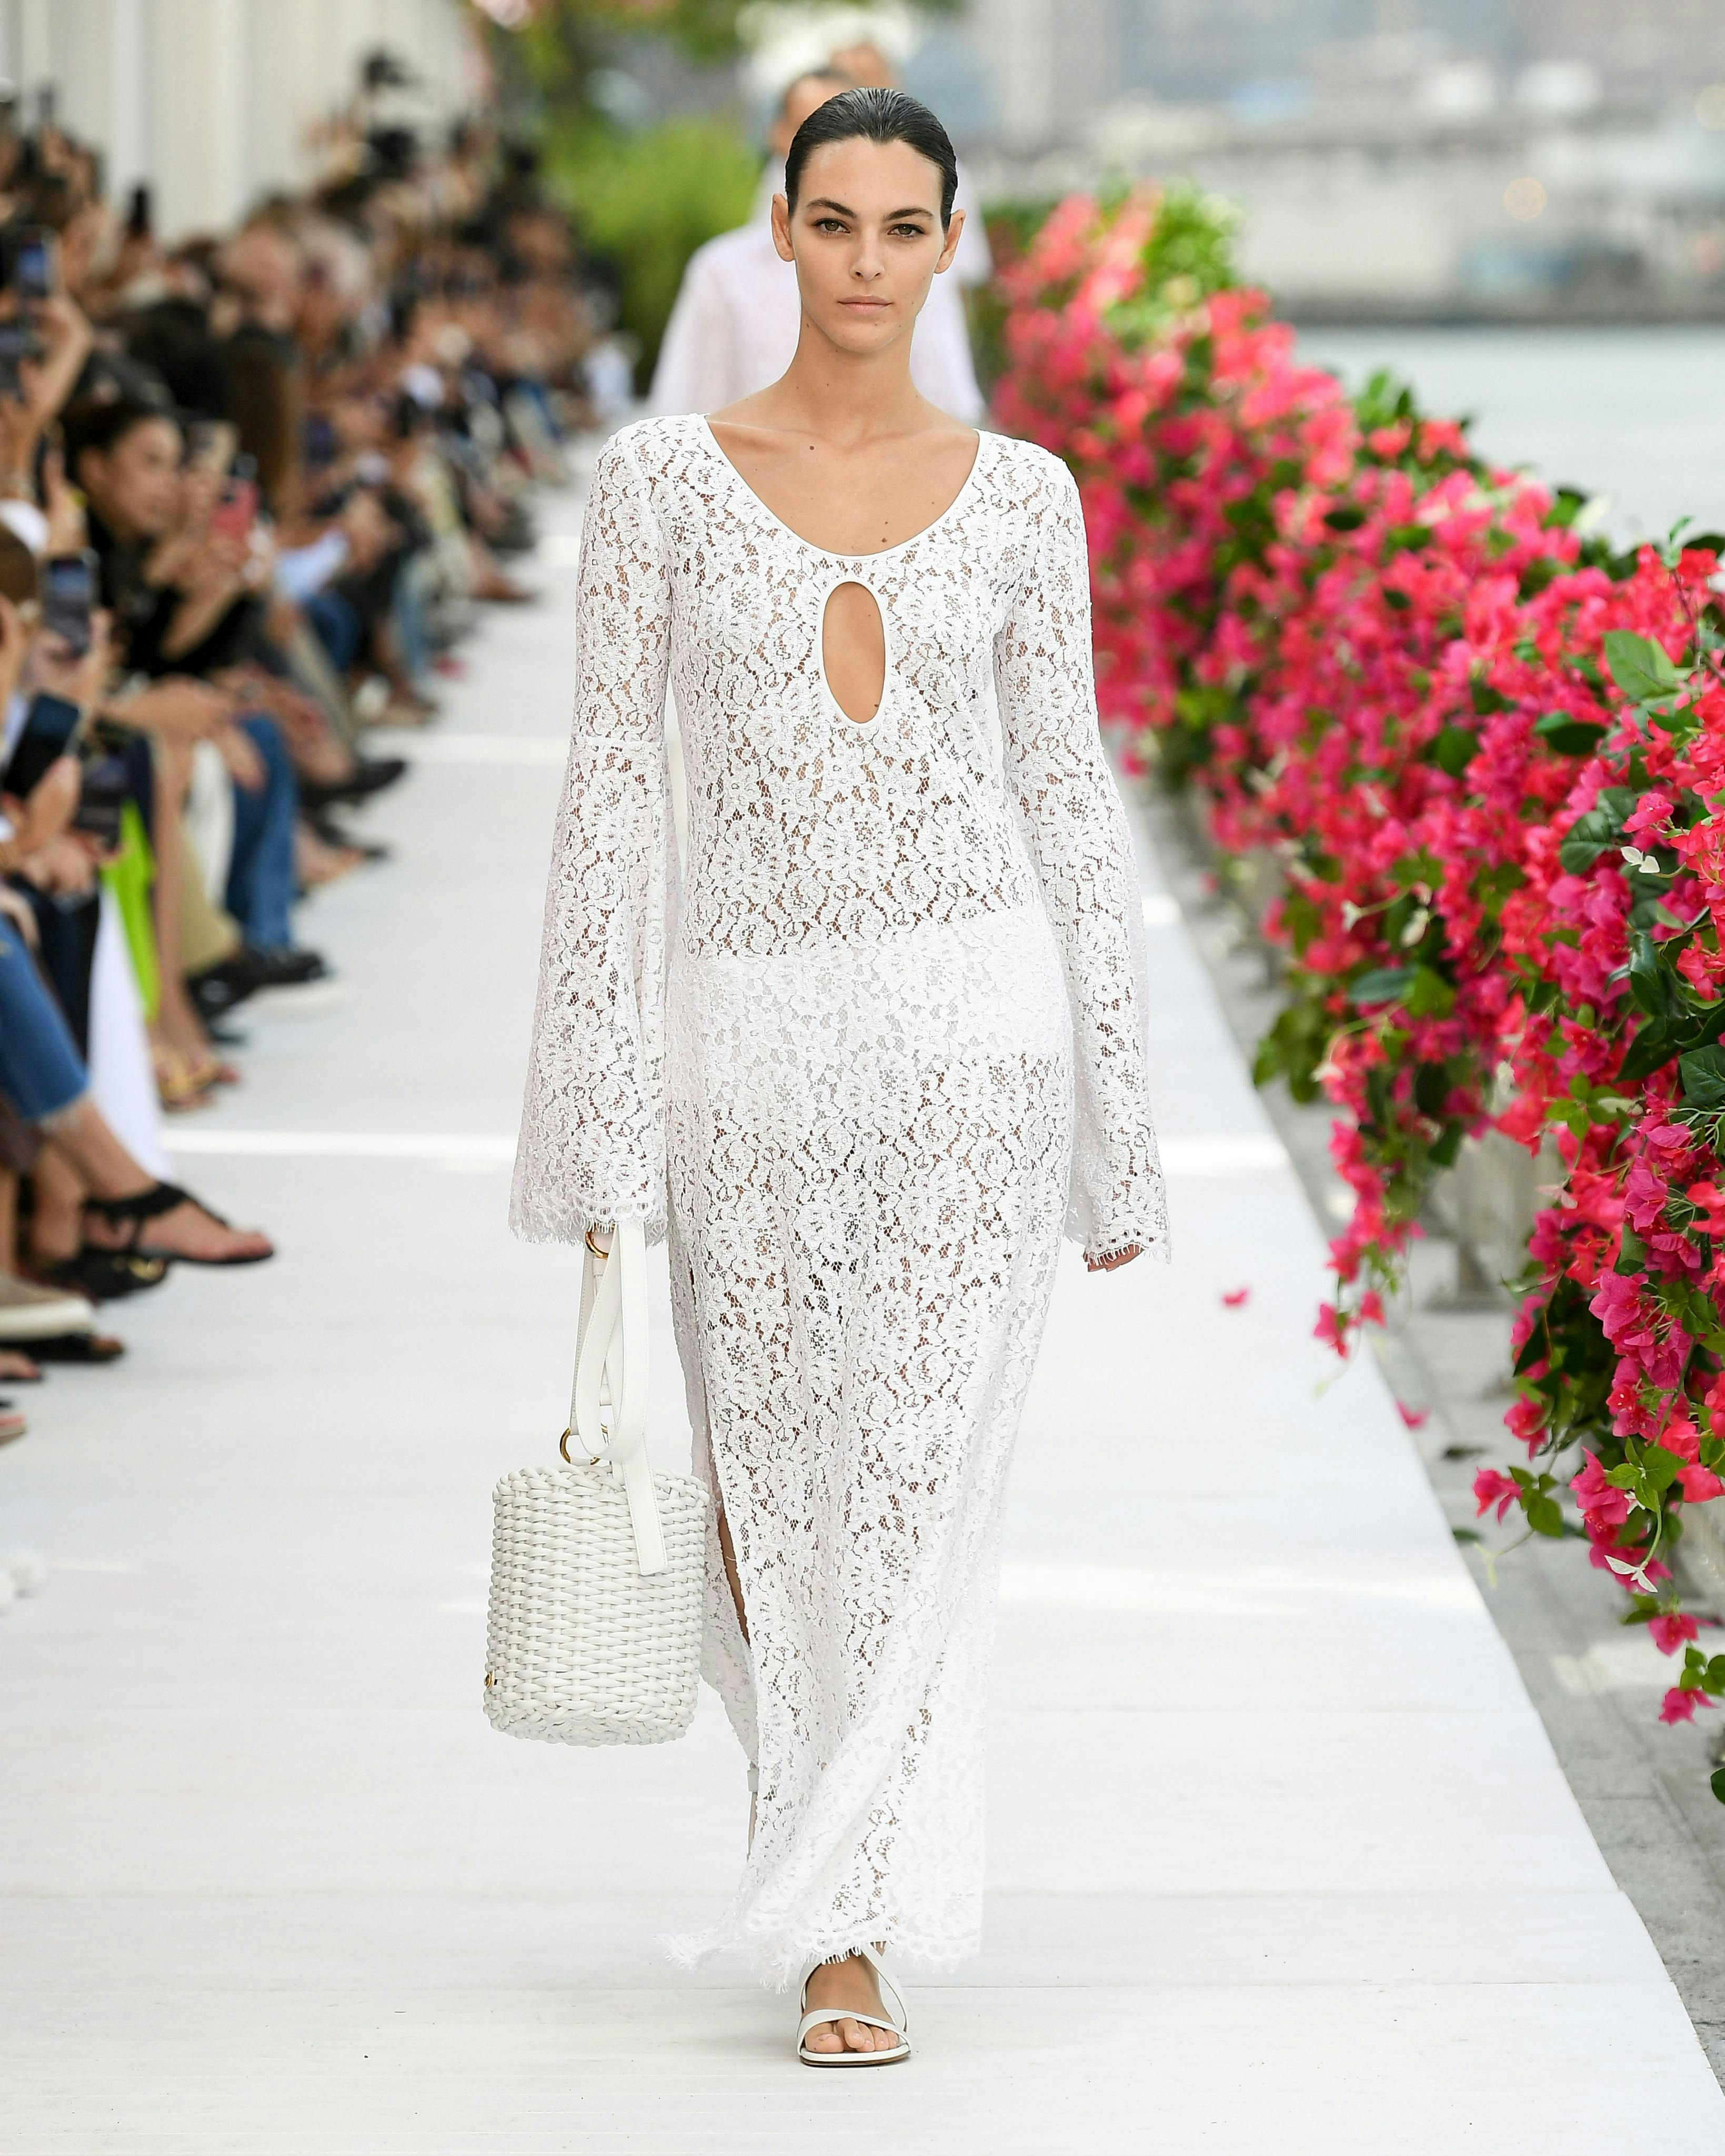 model in white lace gown